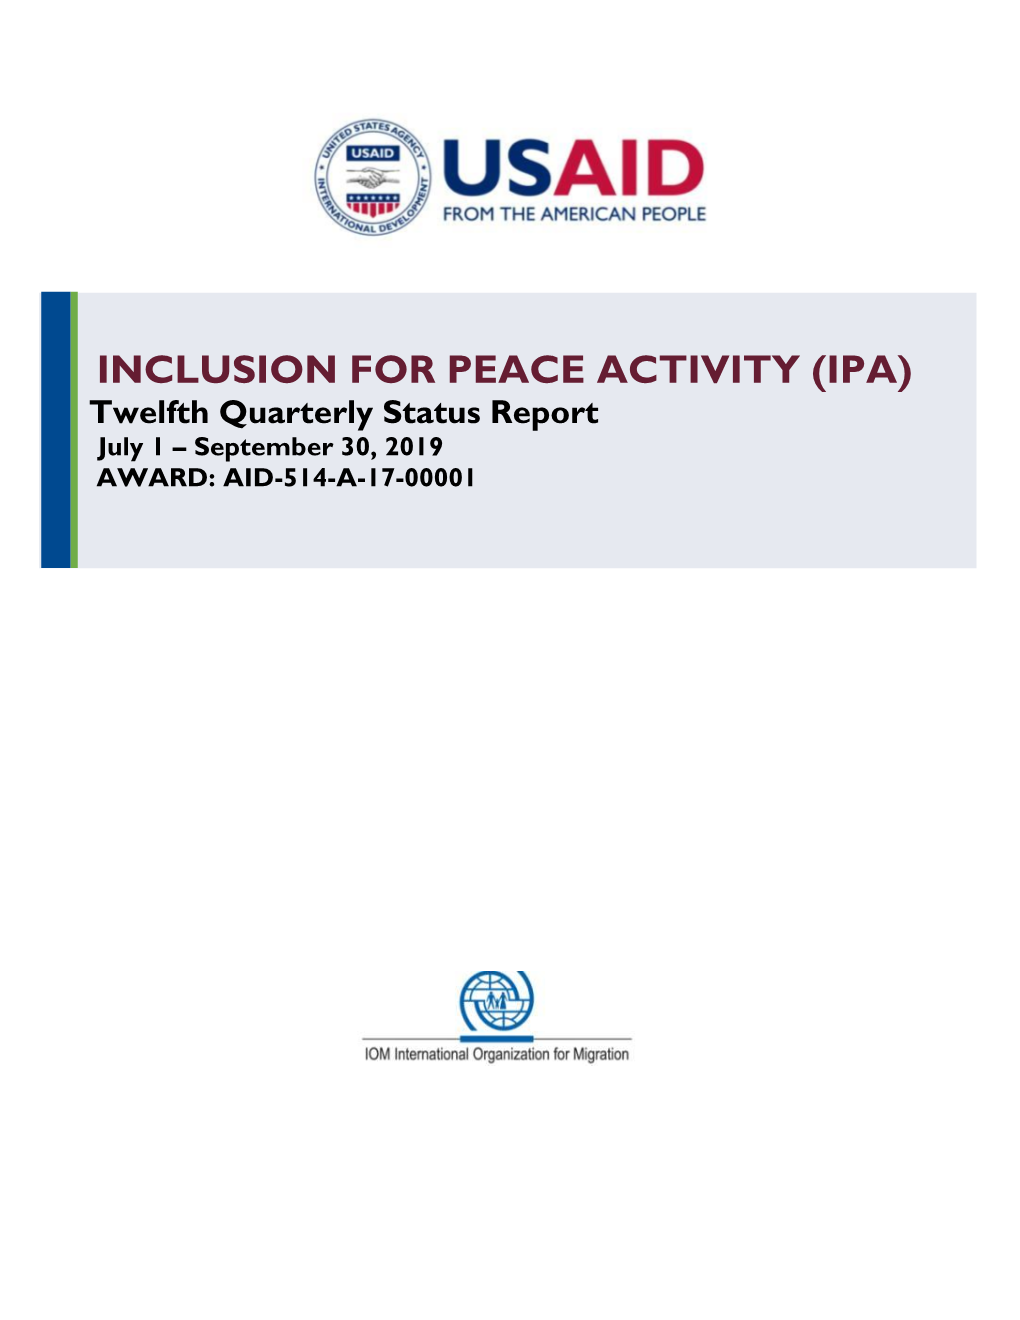 INCLUSION for PEACE ACTIVITY (IPA) Twelfth Quarterly Status Report